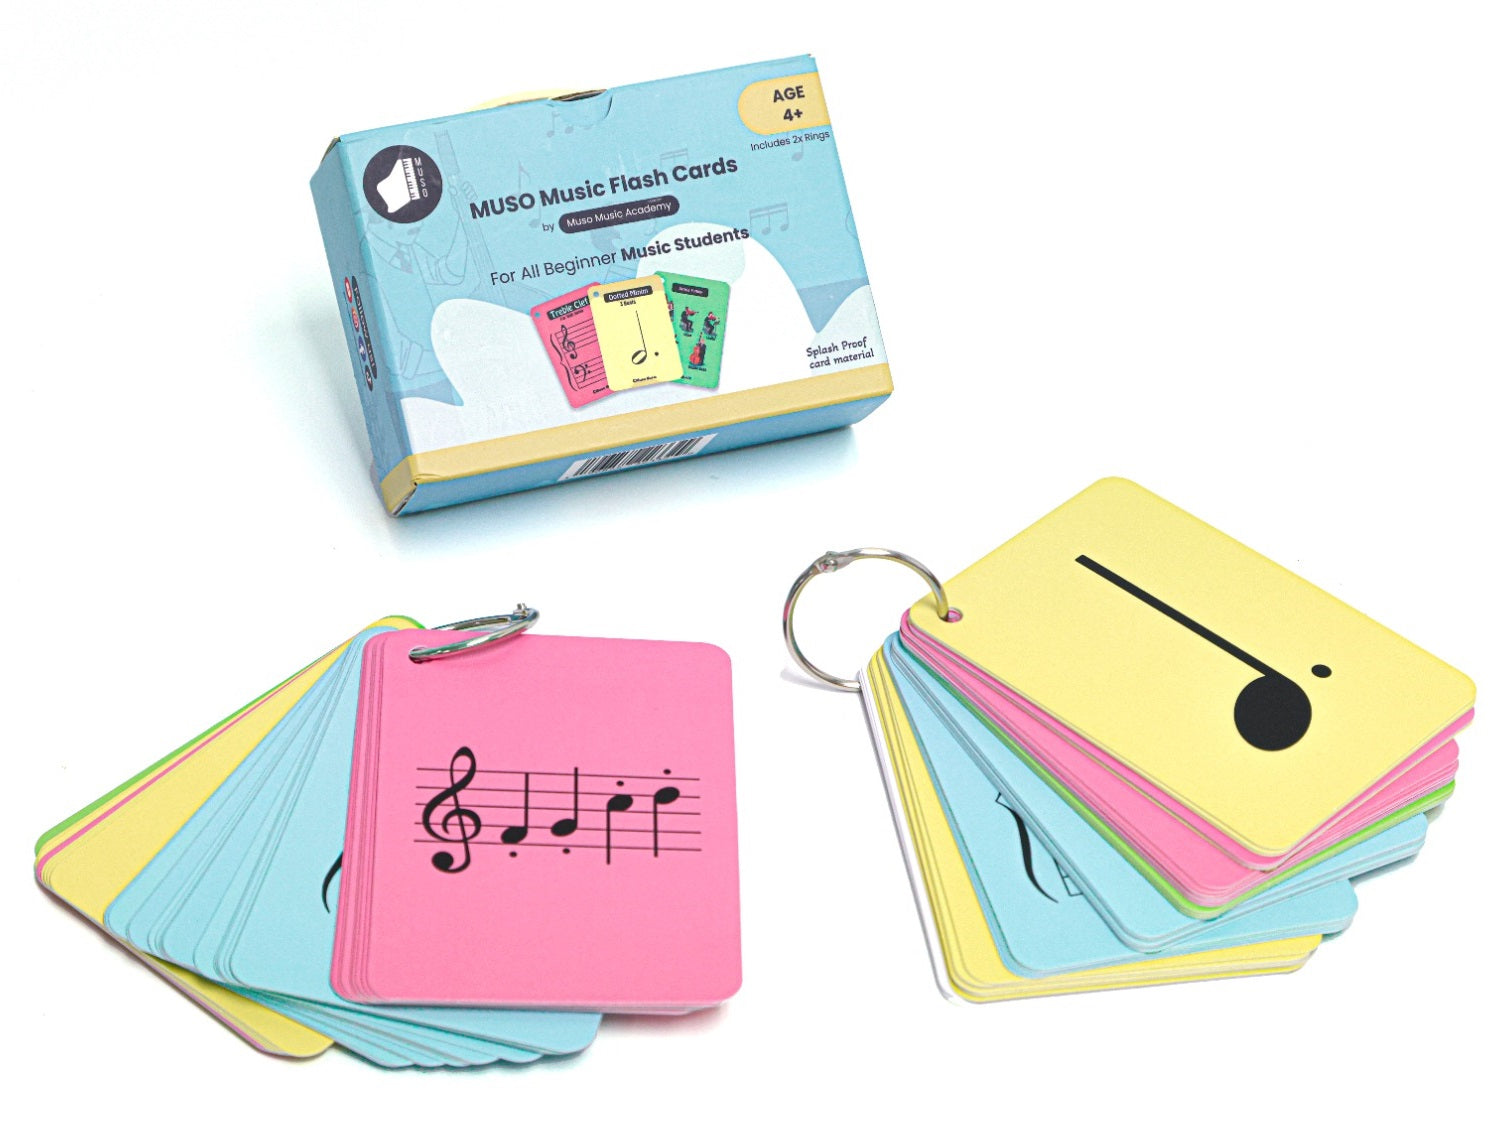 MUSO Music Flash Cards